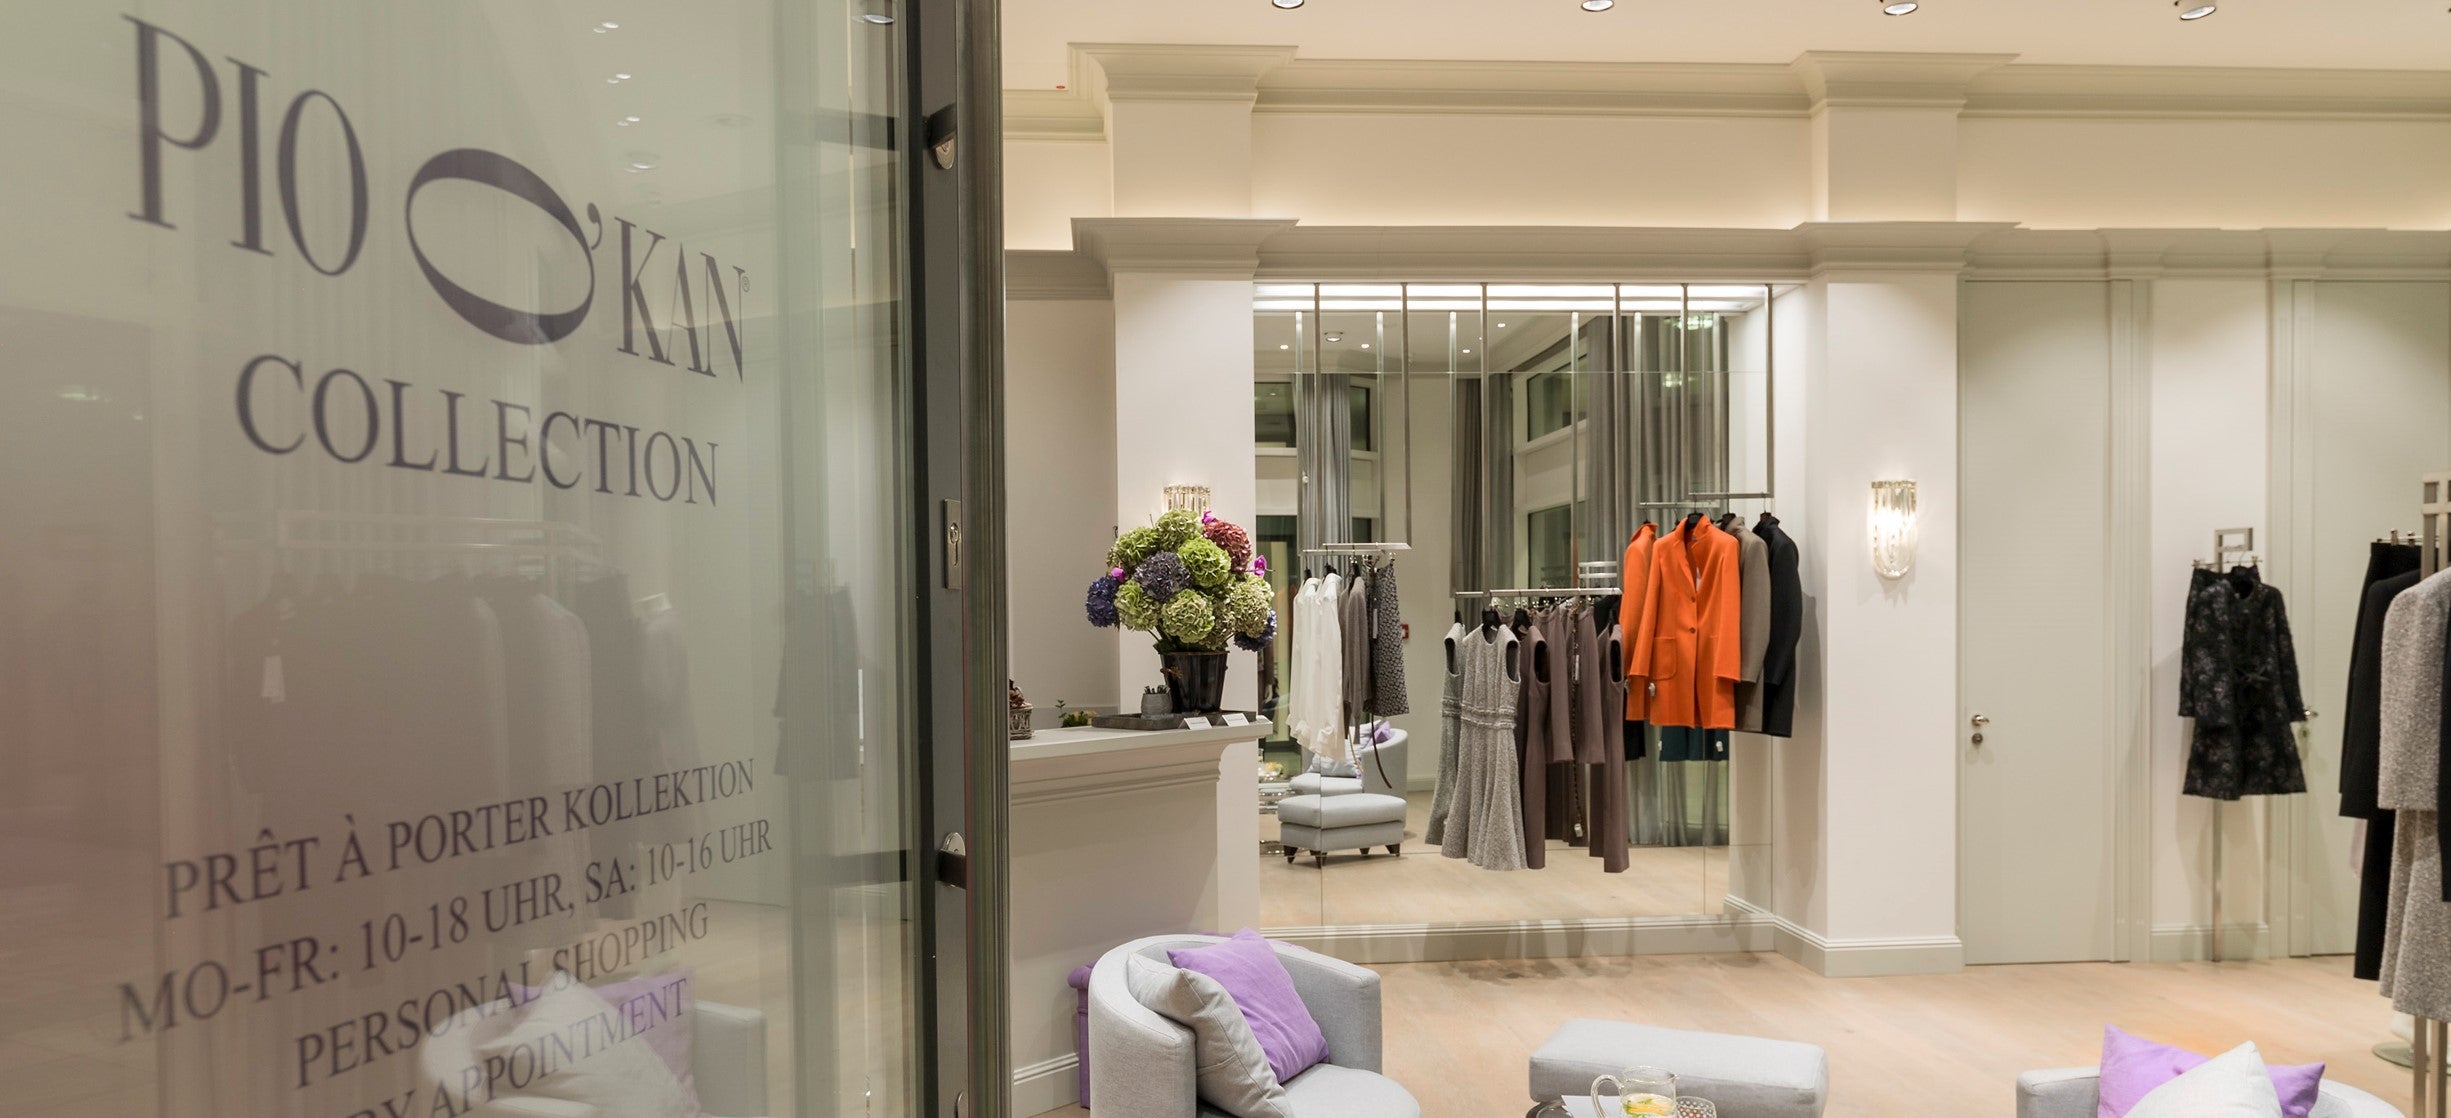 PIO O'KAN expands: New flagship store directly next to the Couturesalon on Königsallee in Düsseldorf for the first prêt-à-porter collection in 2016